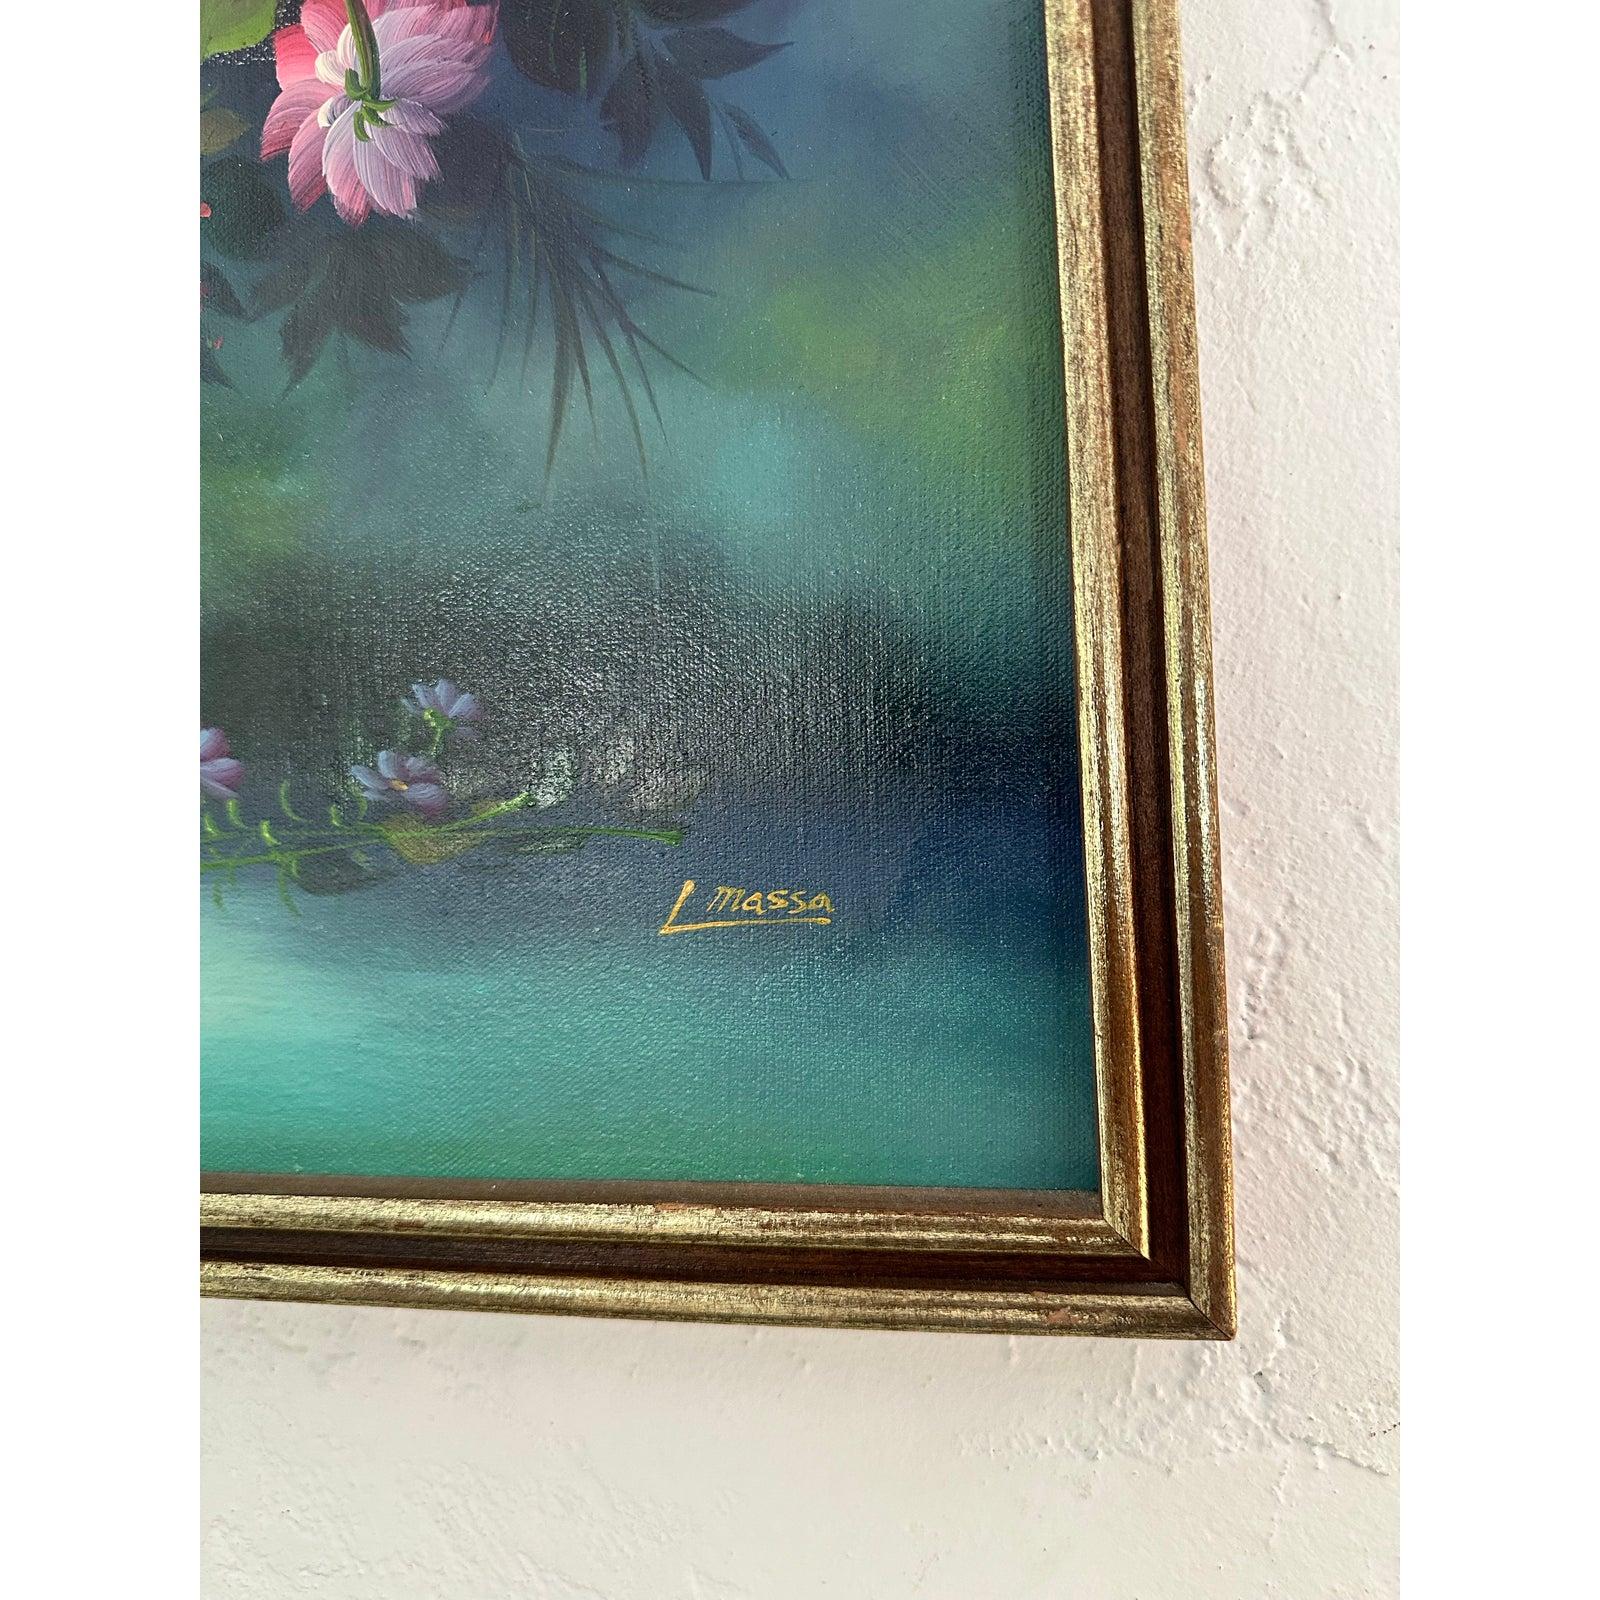 Vintage floral oil on canvas including soft pastels in combination with bold primary colors. Features a focal point of flowers with depth of field and at thin brown frame. Acquired from a Palm Beach estate. 